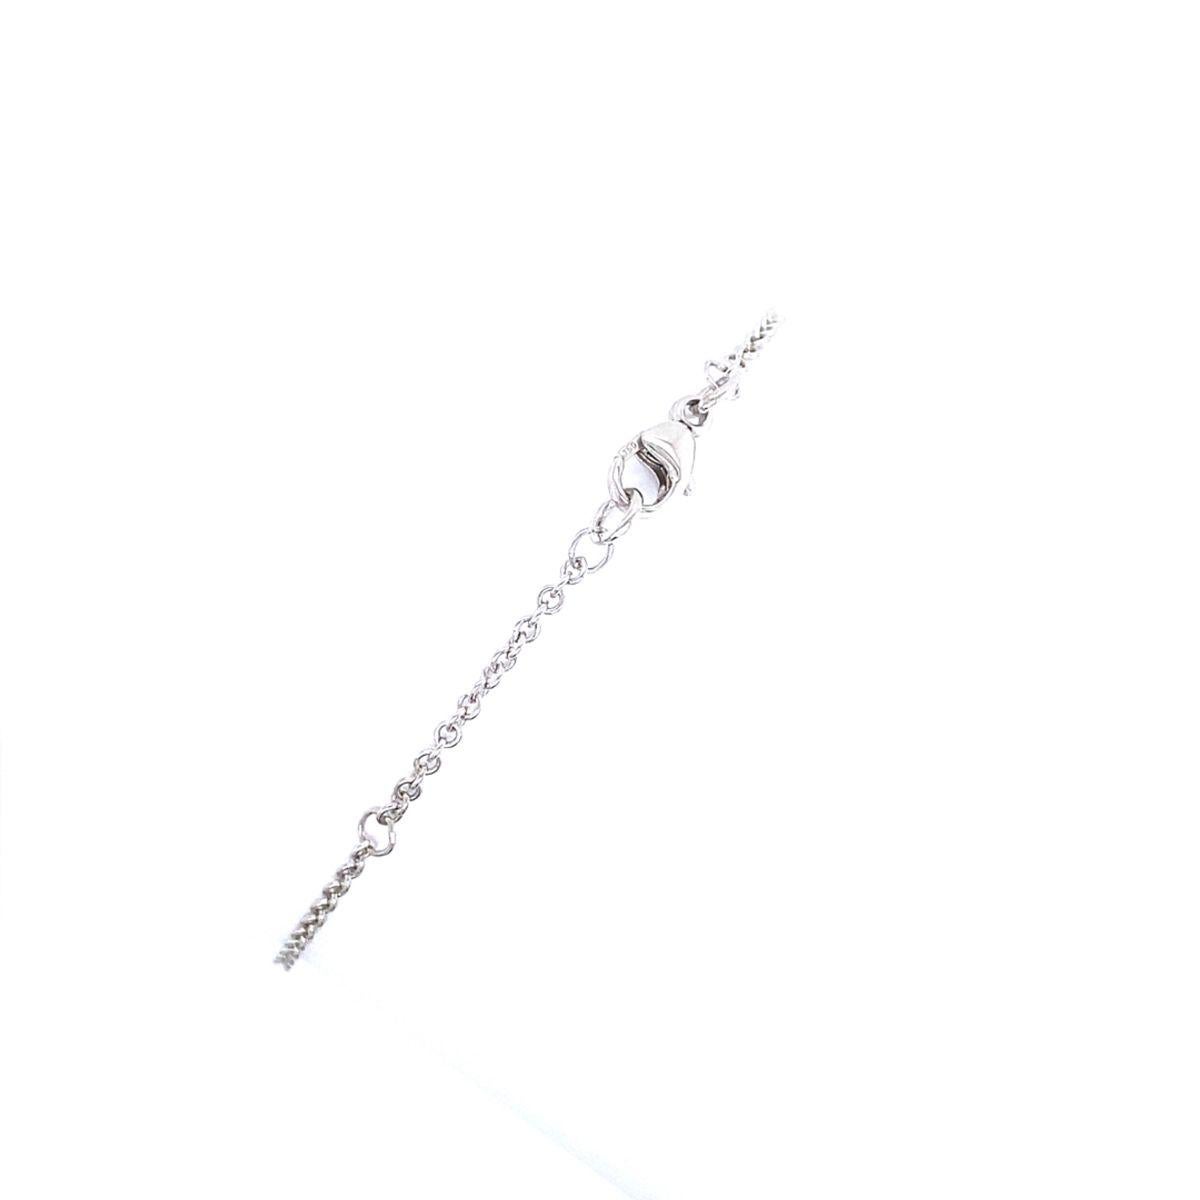 18ct White Gold Tennis/Chain Bracelet, Set With 3 Round Brilliant Cut Diamonds

Additional Information:
Total Diamond Weight: 0.50ct
Diamond Colour: G/H
Diamond Clarity: SI1
Total Weight: 2.6g
Diamond Head Size: L 14.8mm x W 4.40mm
SMS4937